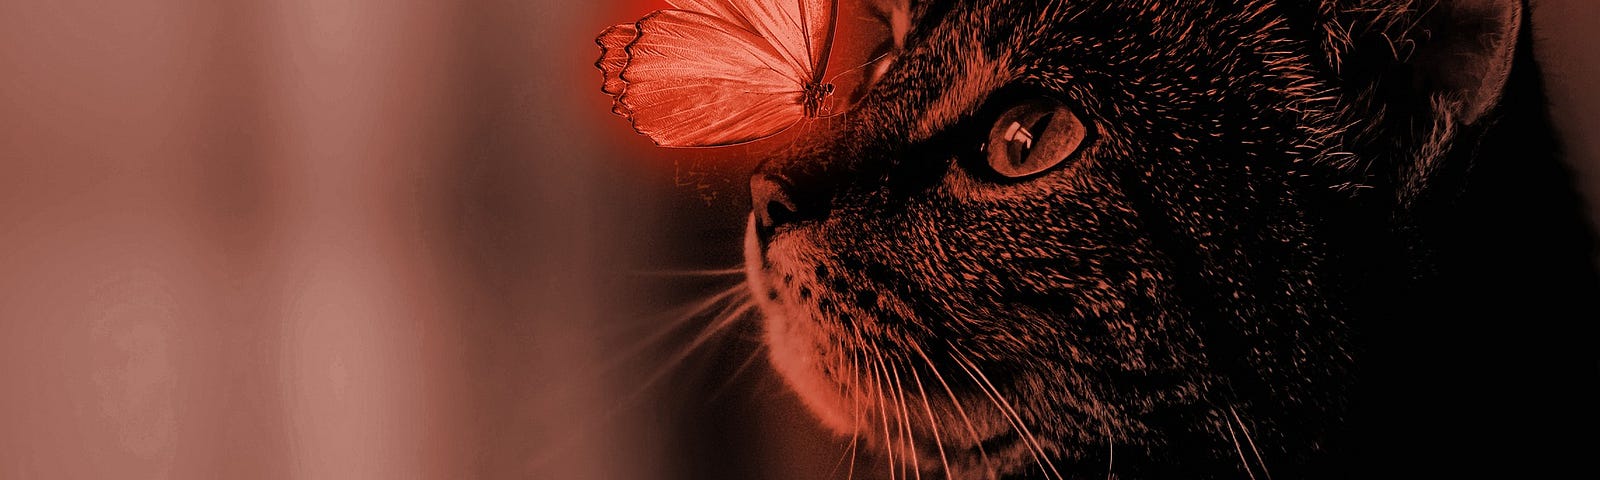 A cat staring at a butterfly on its nose